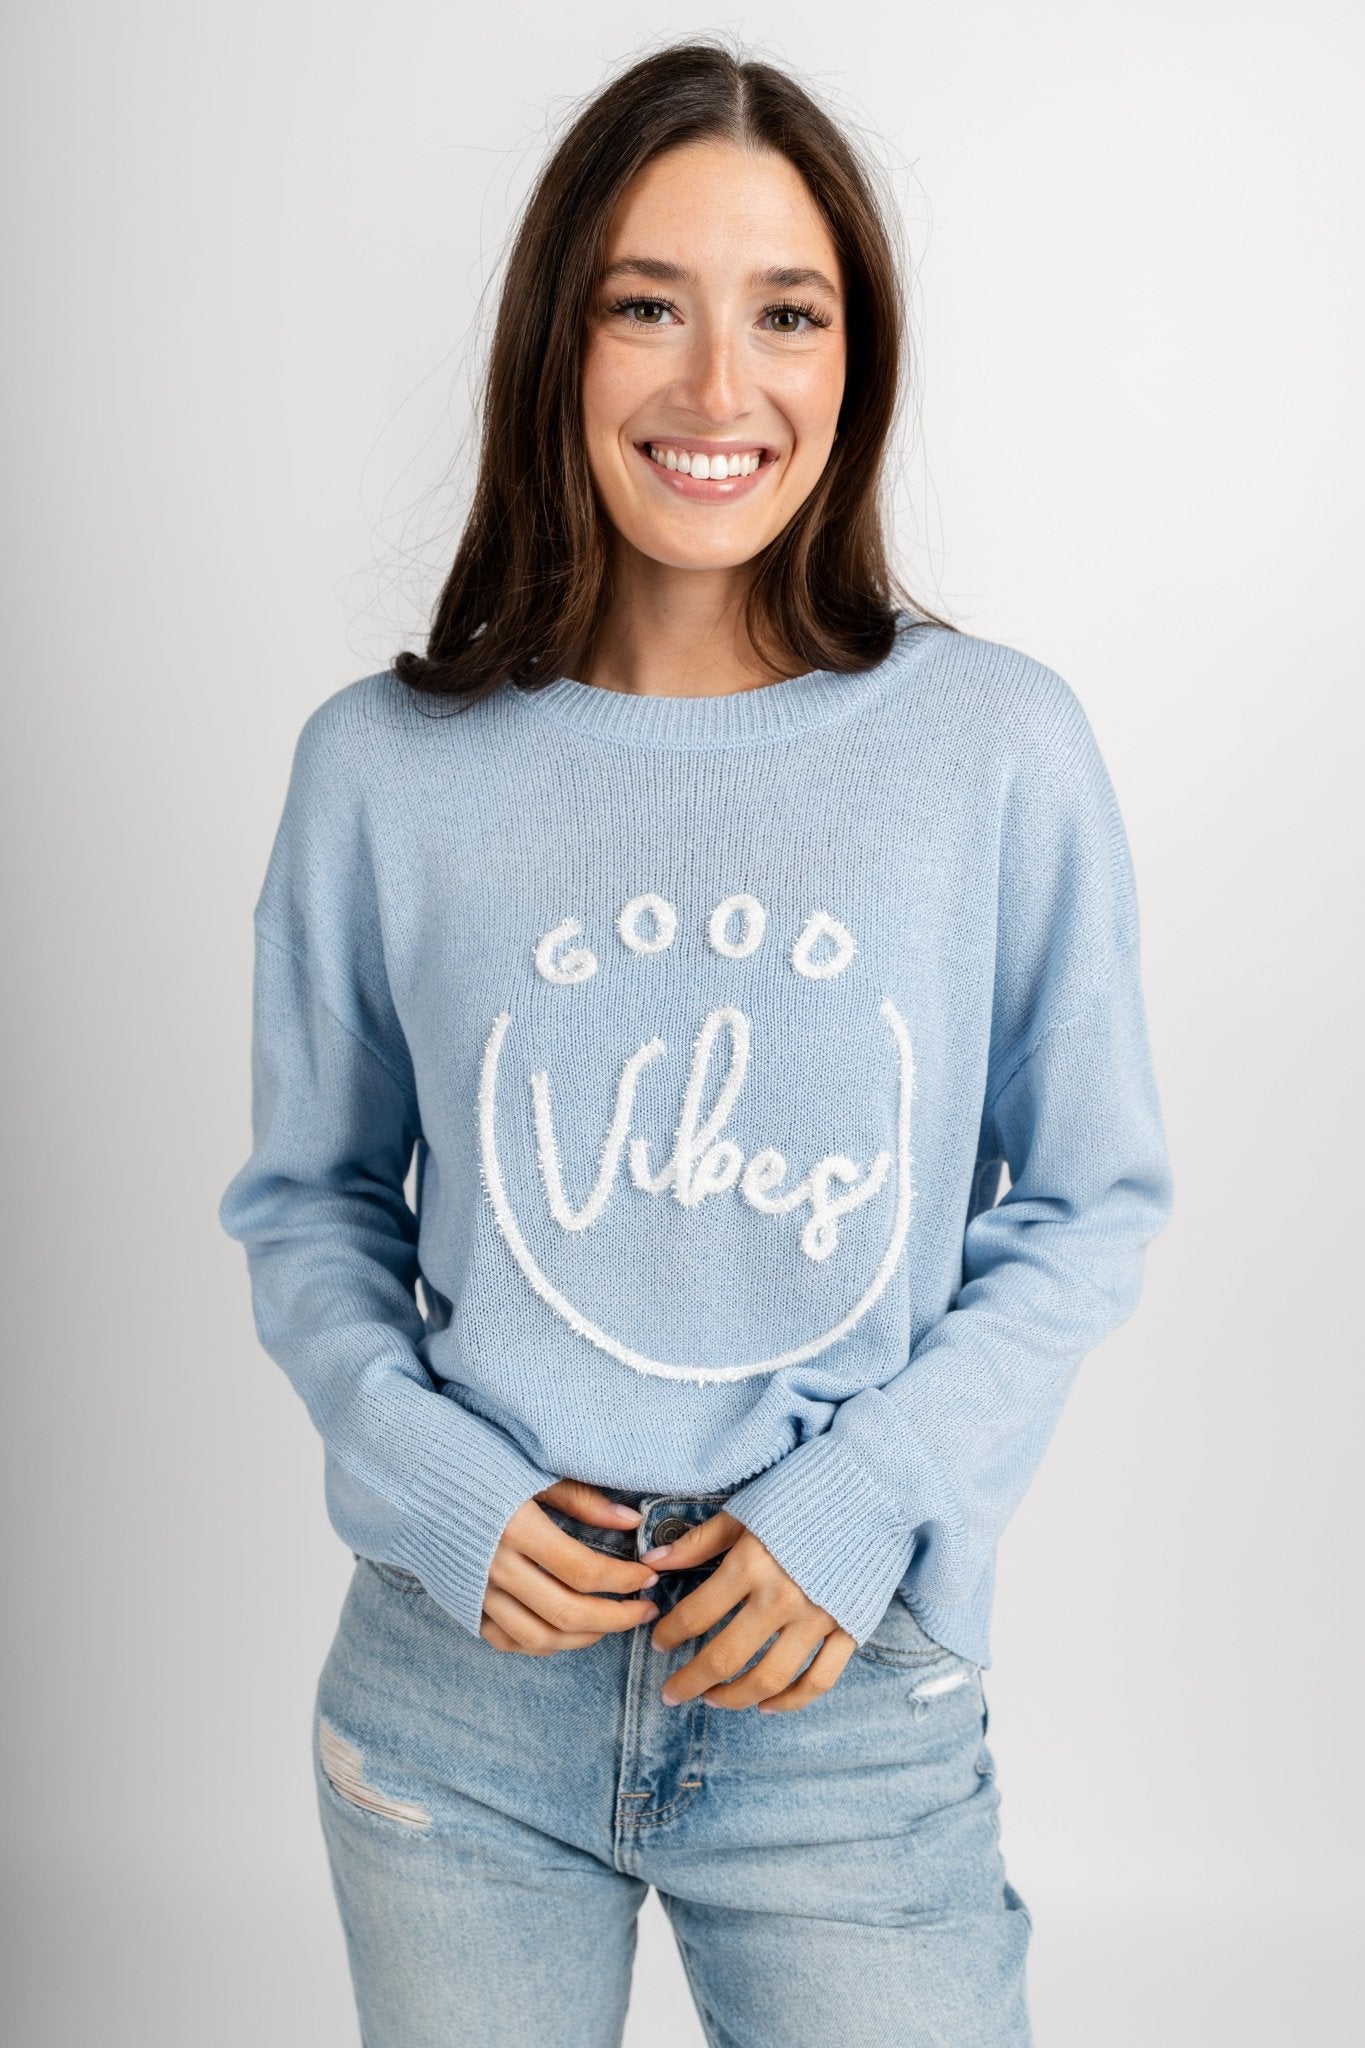 Good vibes tinsel sweater blue – Stylish Sweaters | Boutique Sweaters at Lush Fashion Lounge Boutique in Oklahoma City